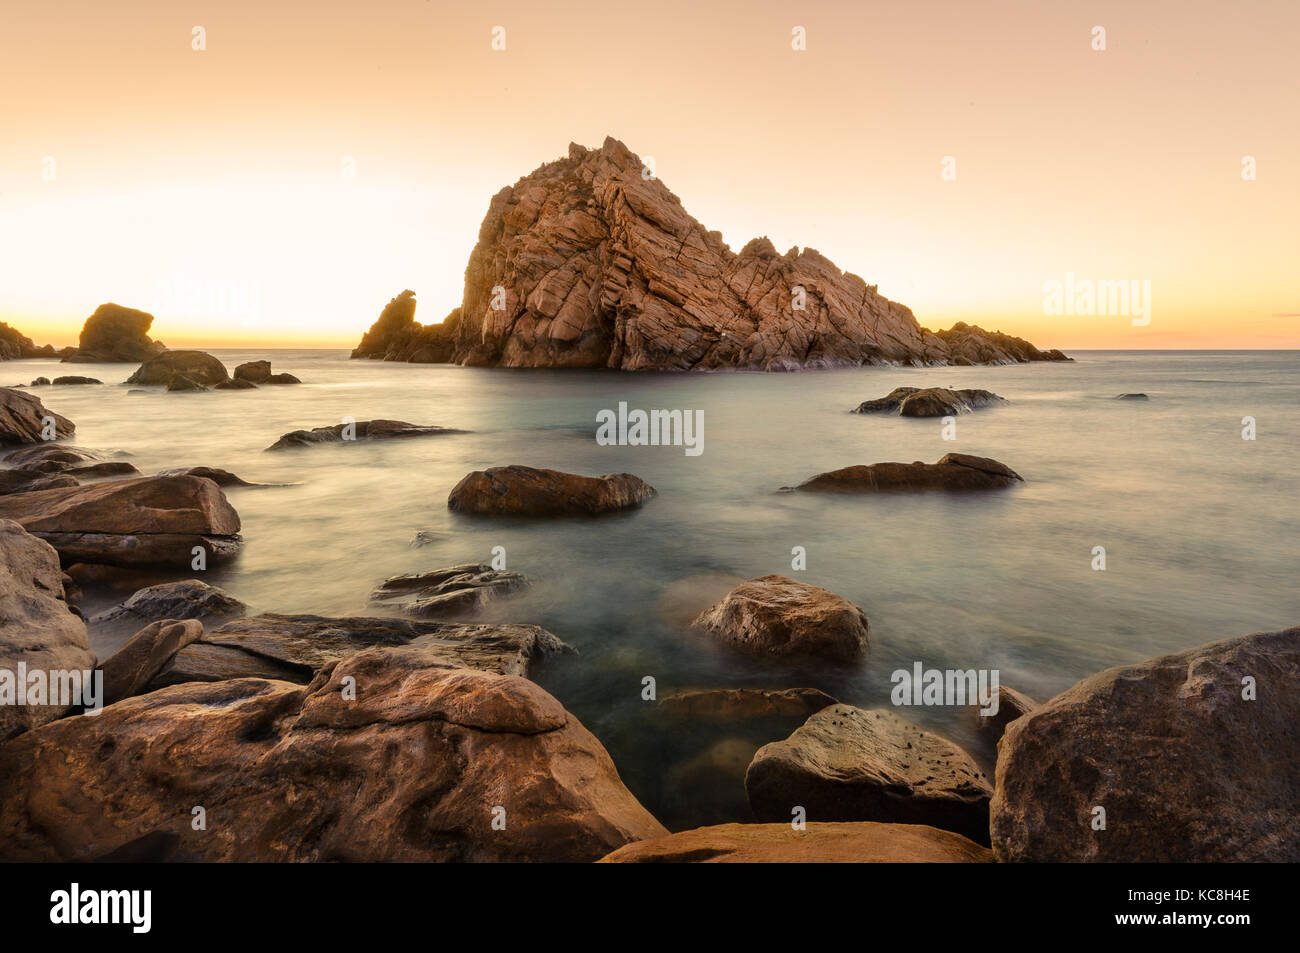 Sugarloaf Rock in Leeuwin Naturaliste National Park at sunset. Stock Photo